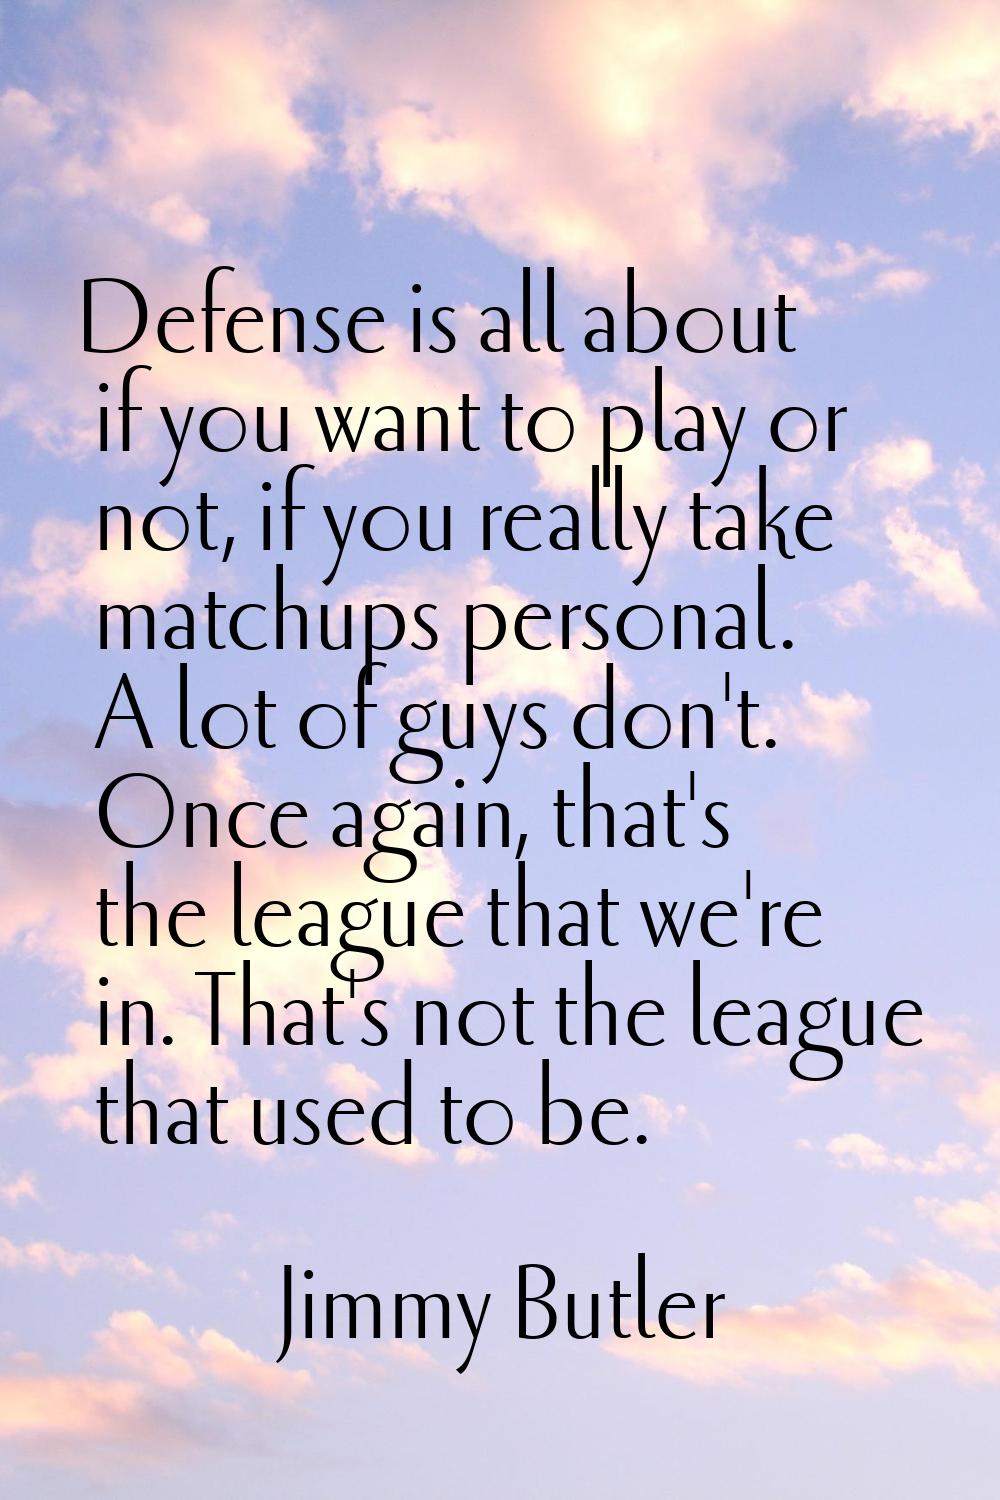 Defense is all about if you want to play or not, if you really take matchups personal. A lot of guy